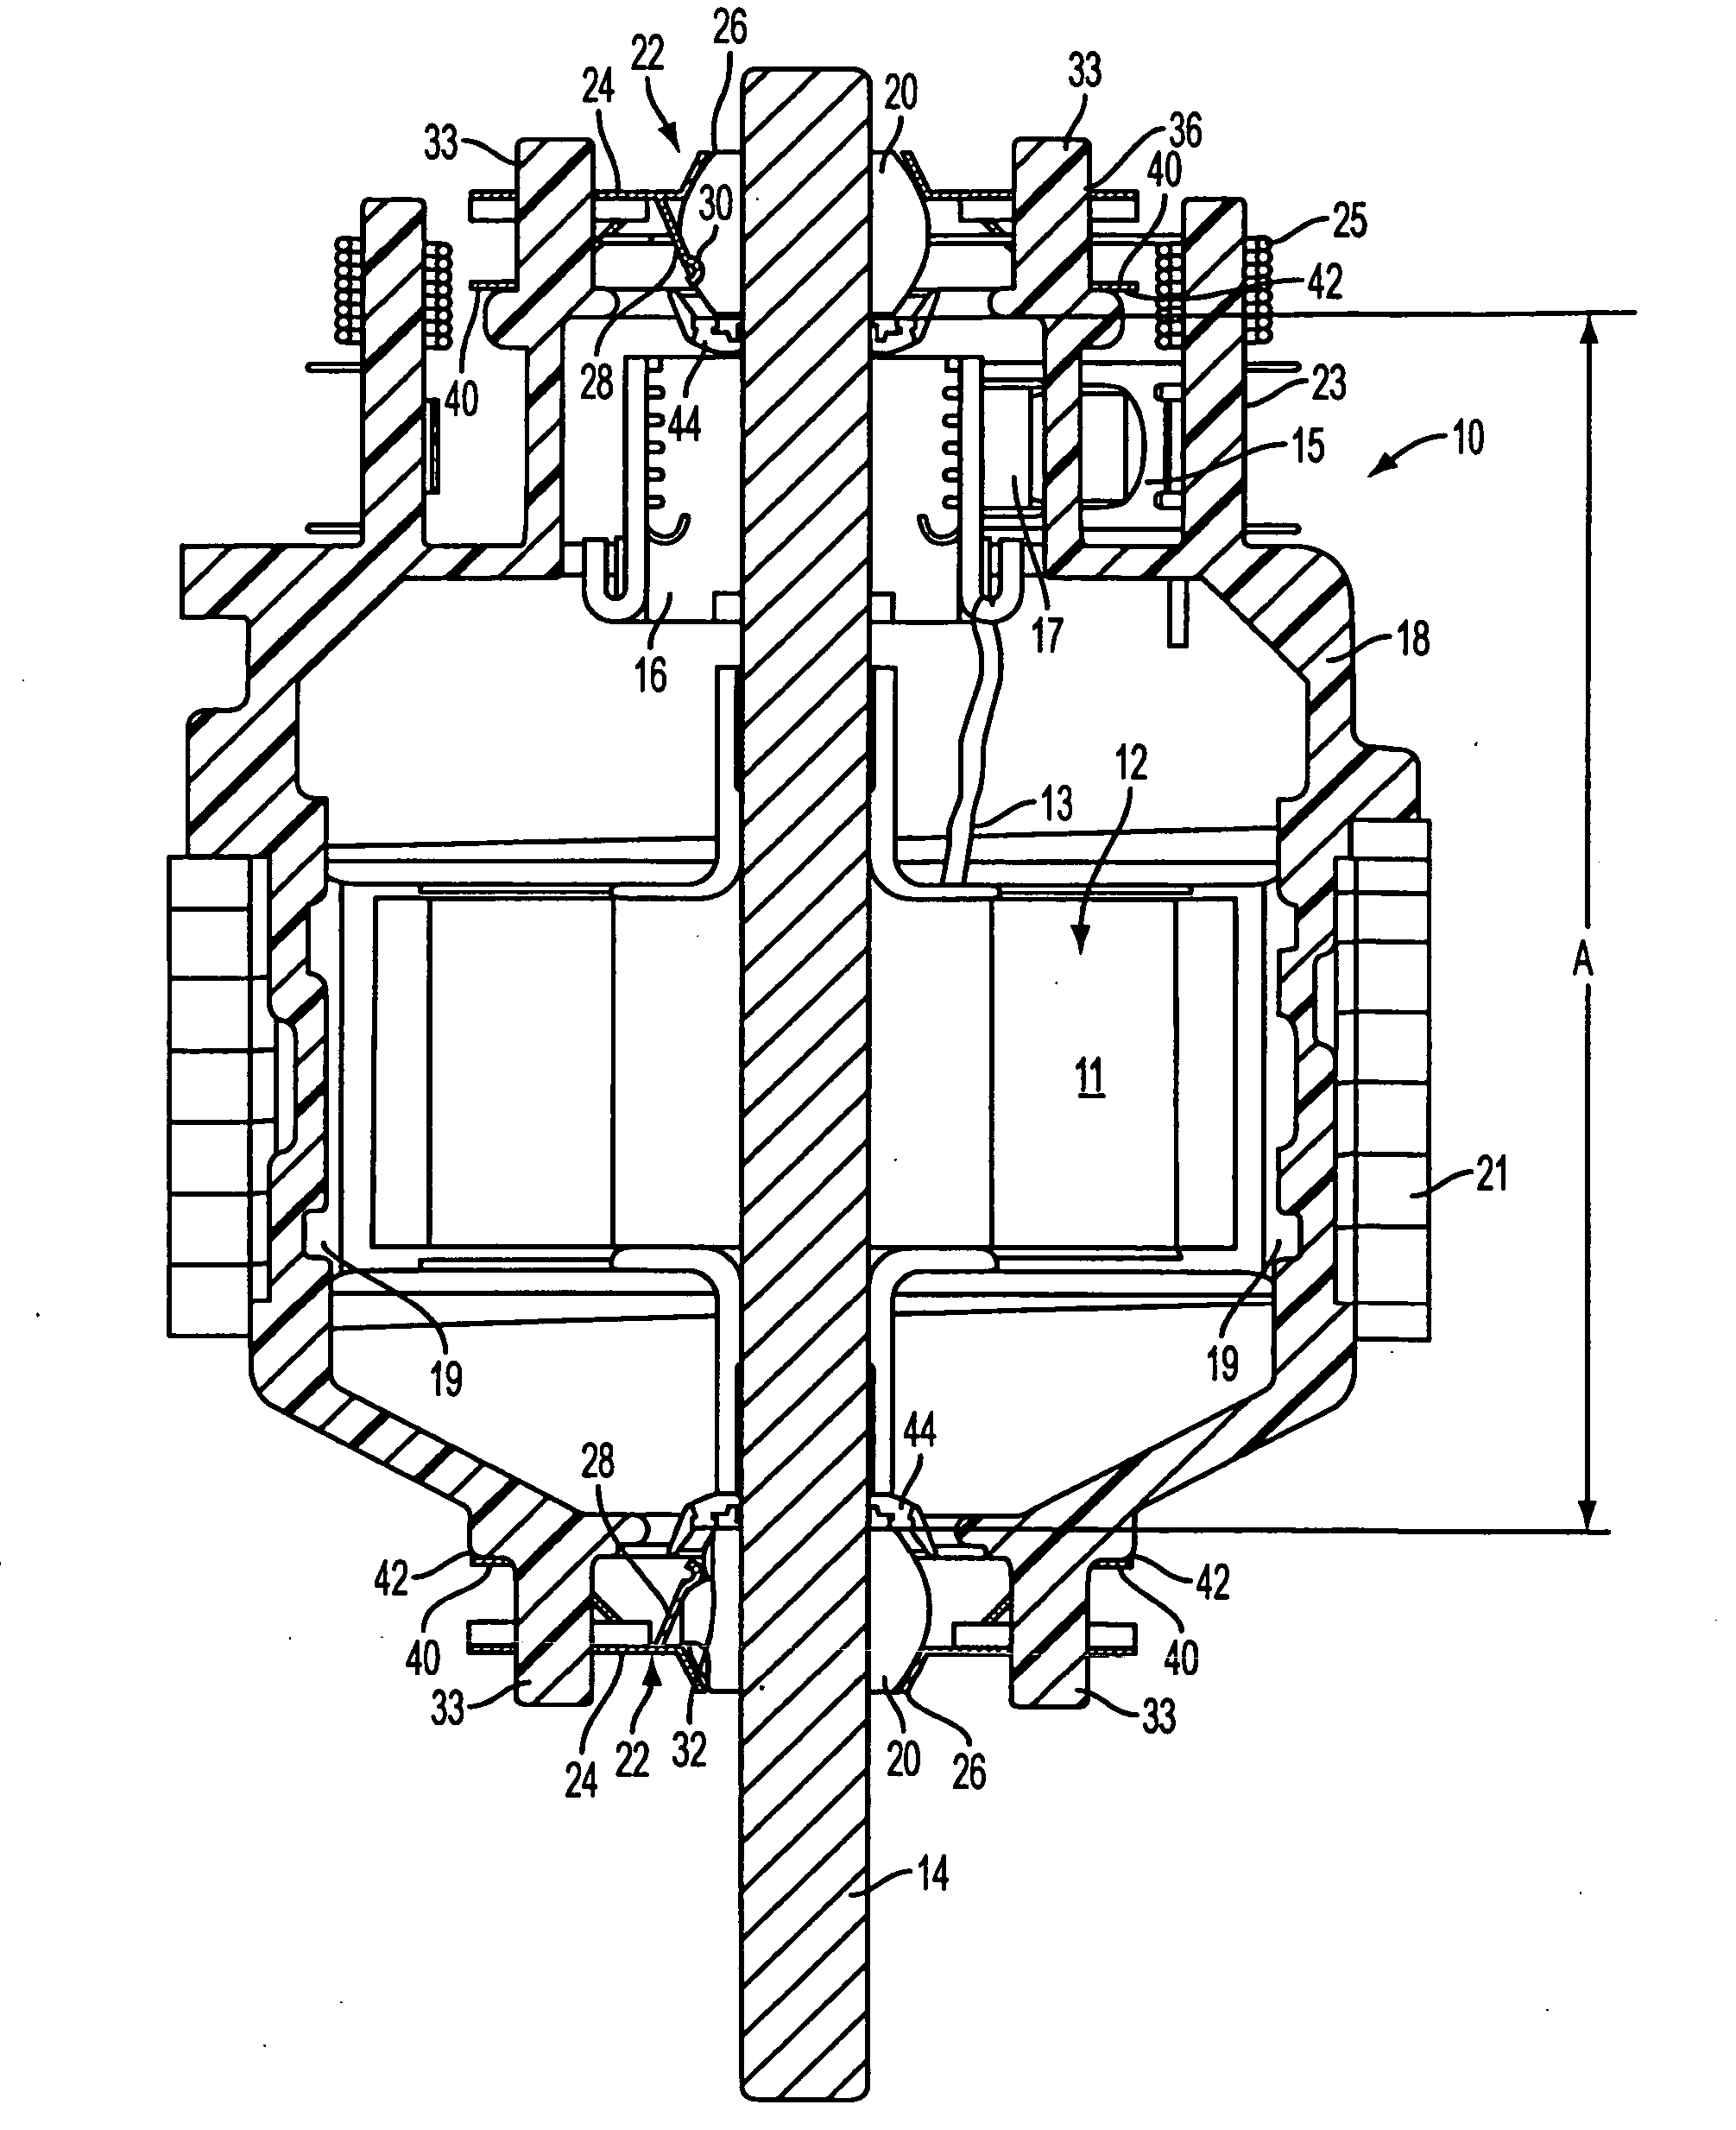 Endplay adjustment and bearing decoupling in an electric motor